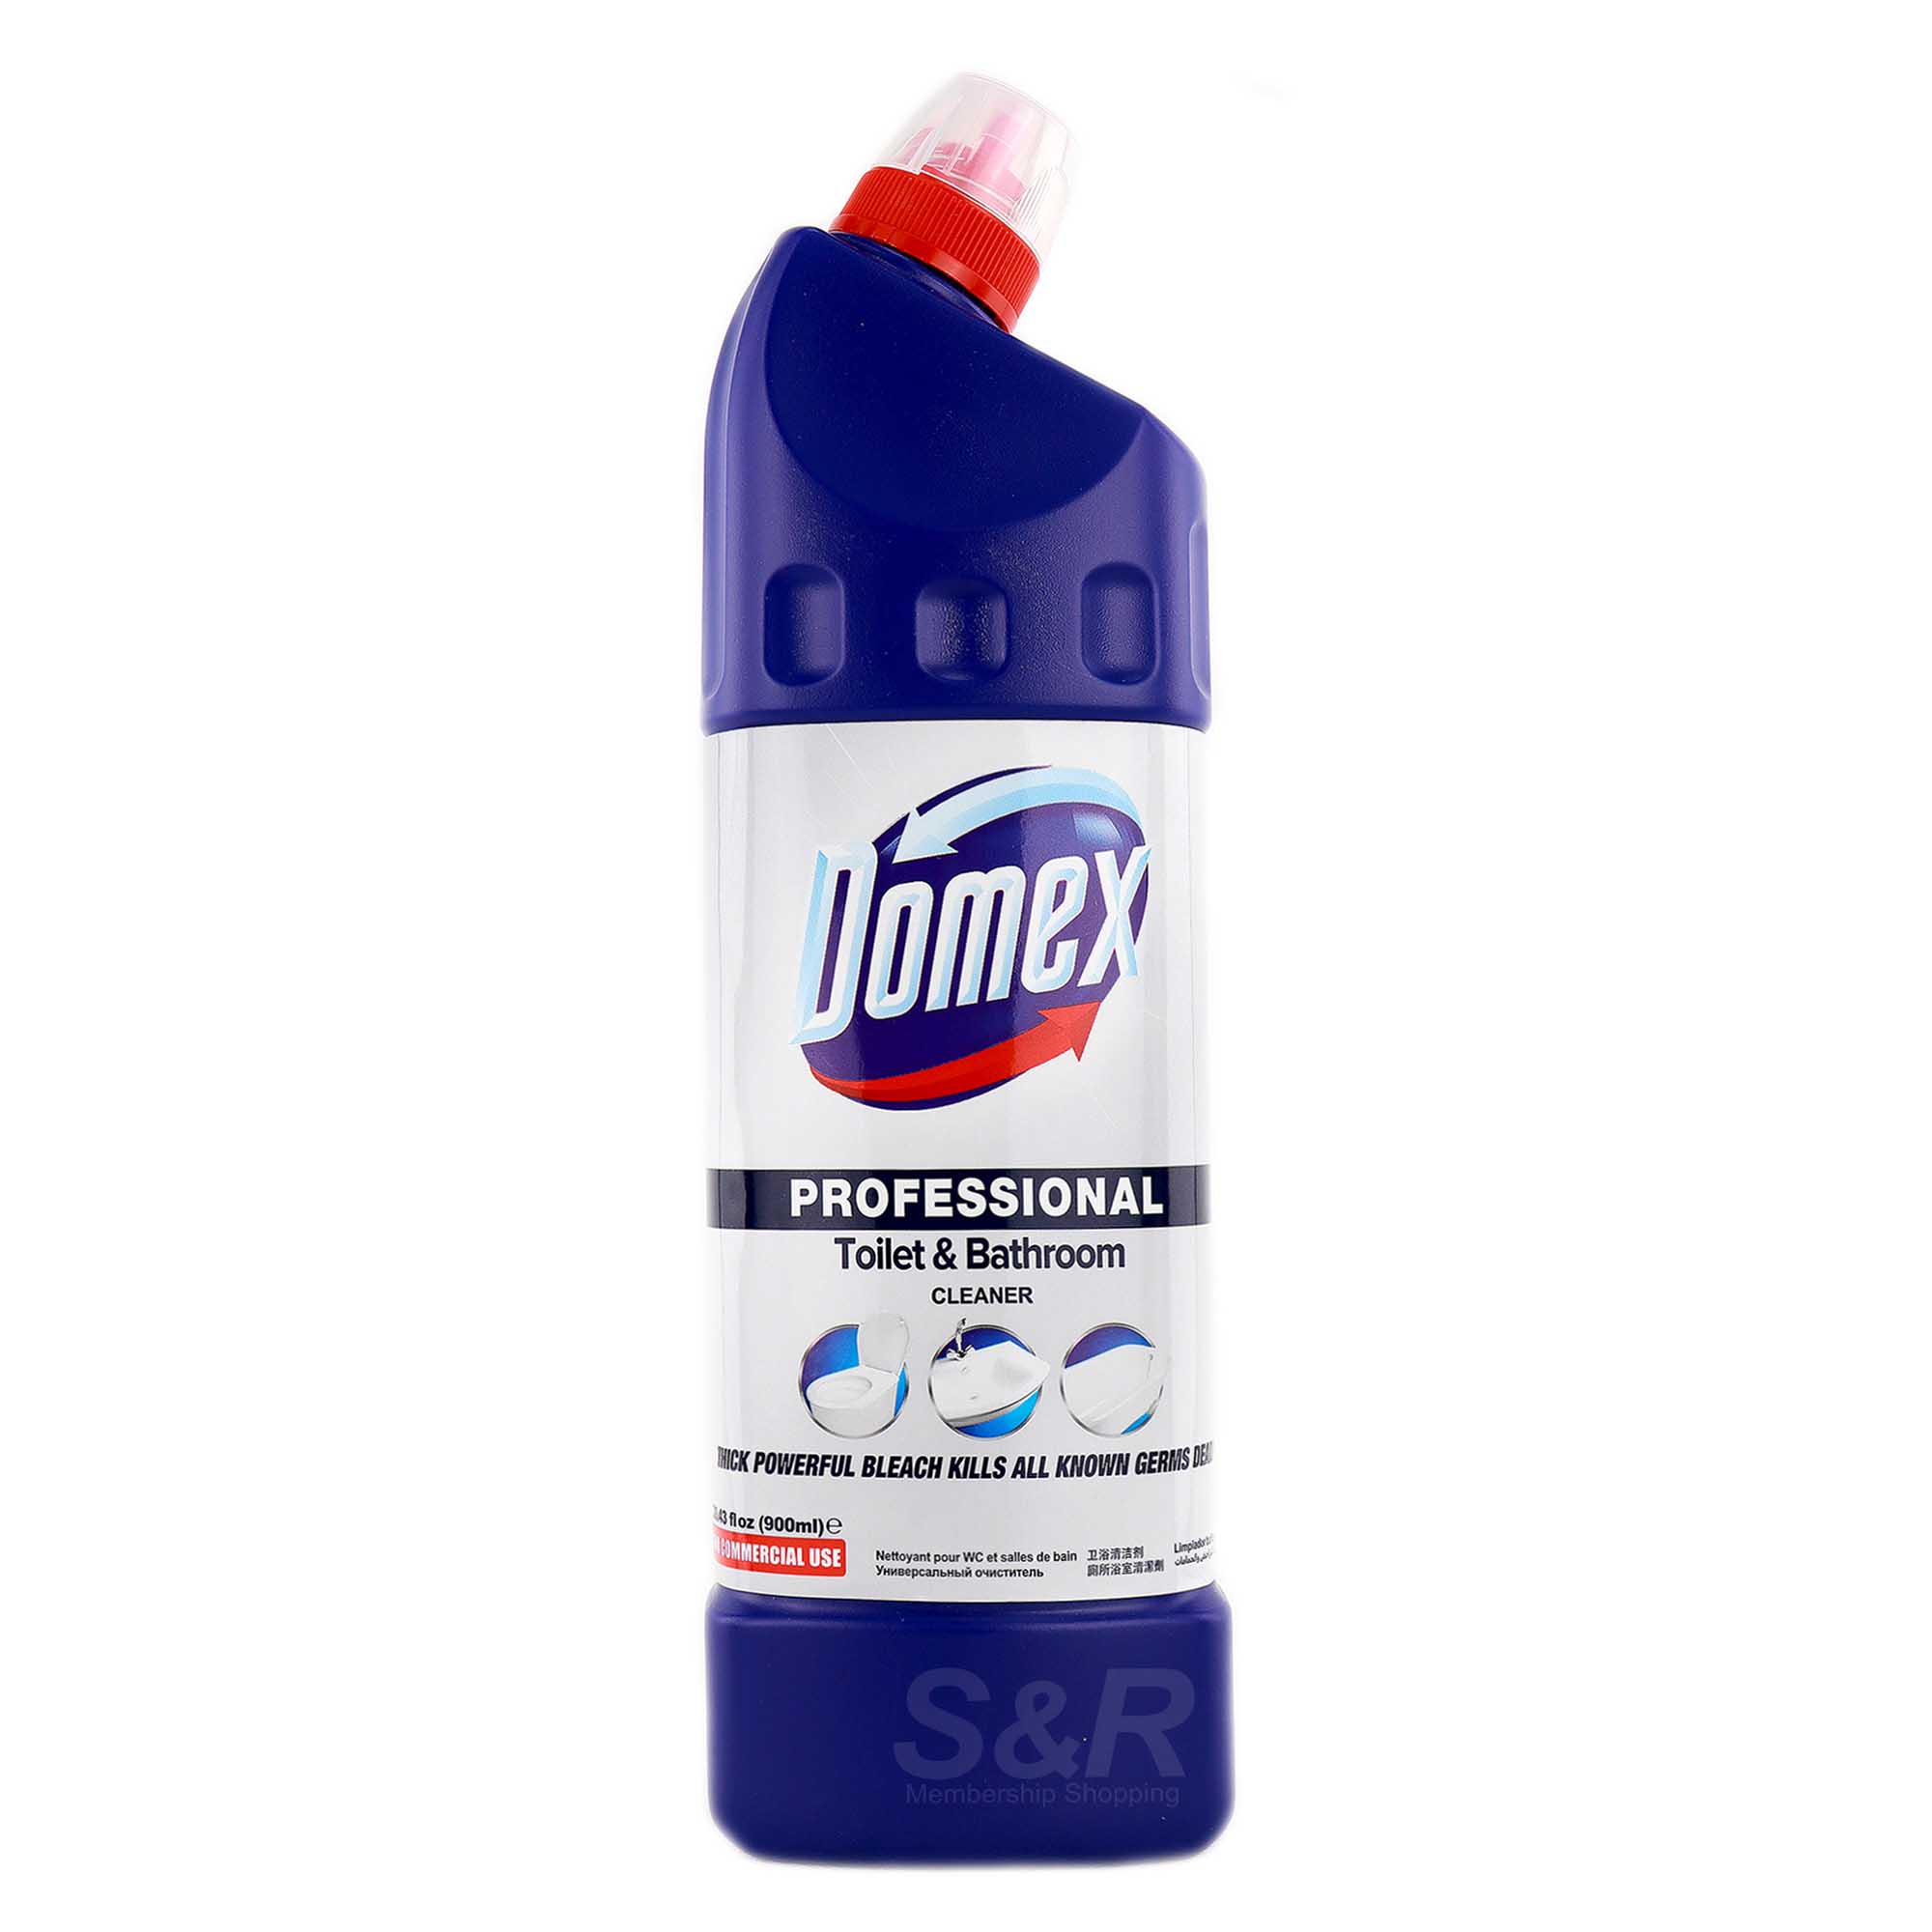 Domex Professional Toilet and Bathroom Cleaner 900mL